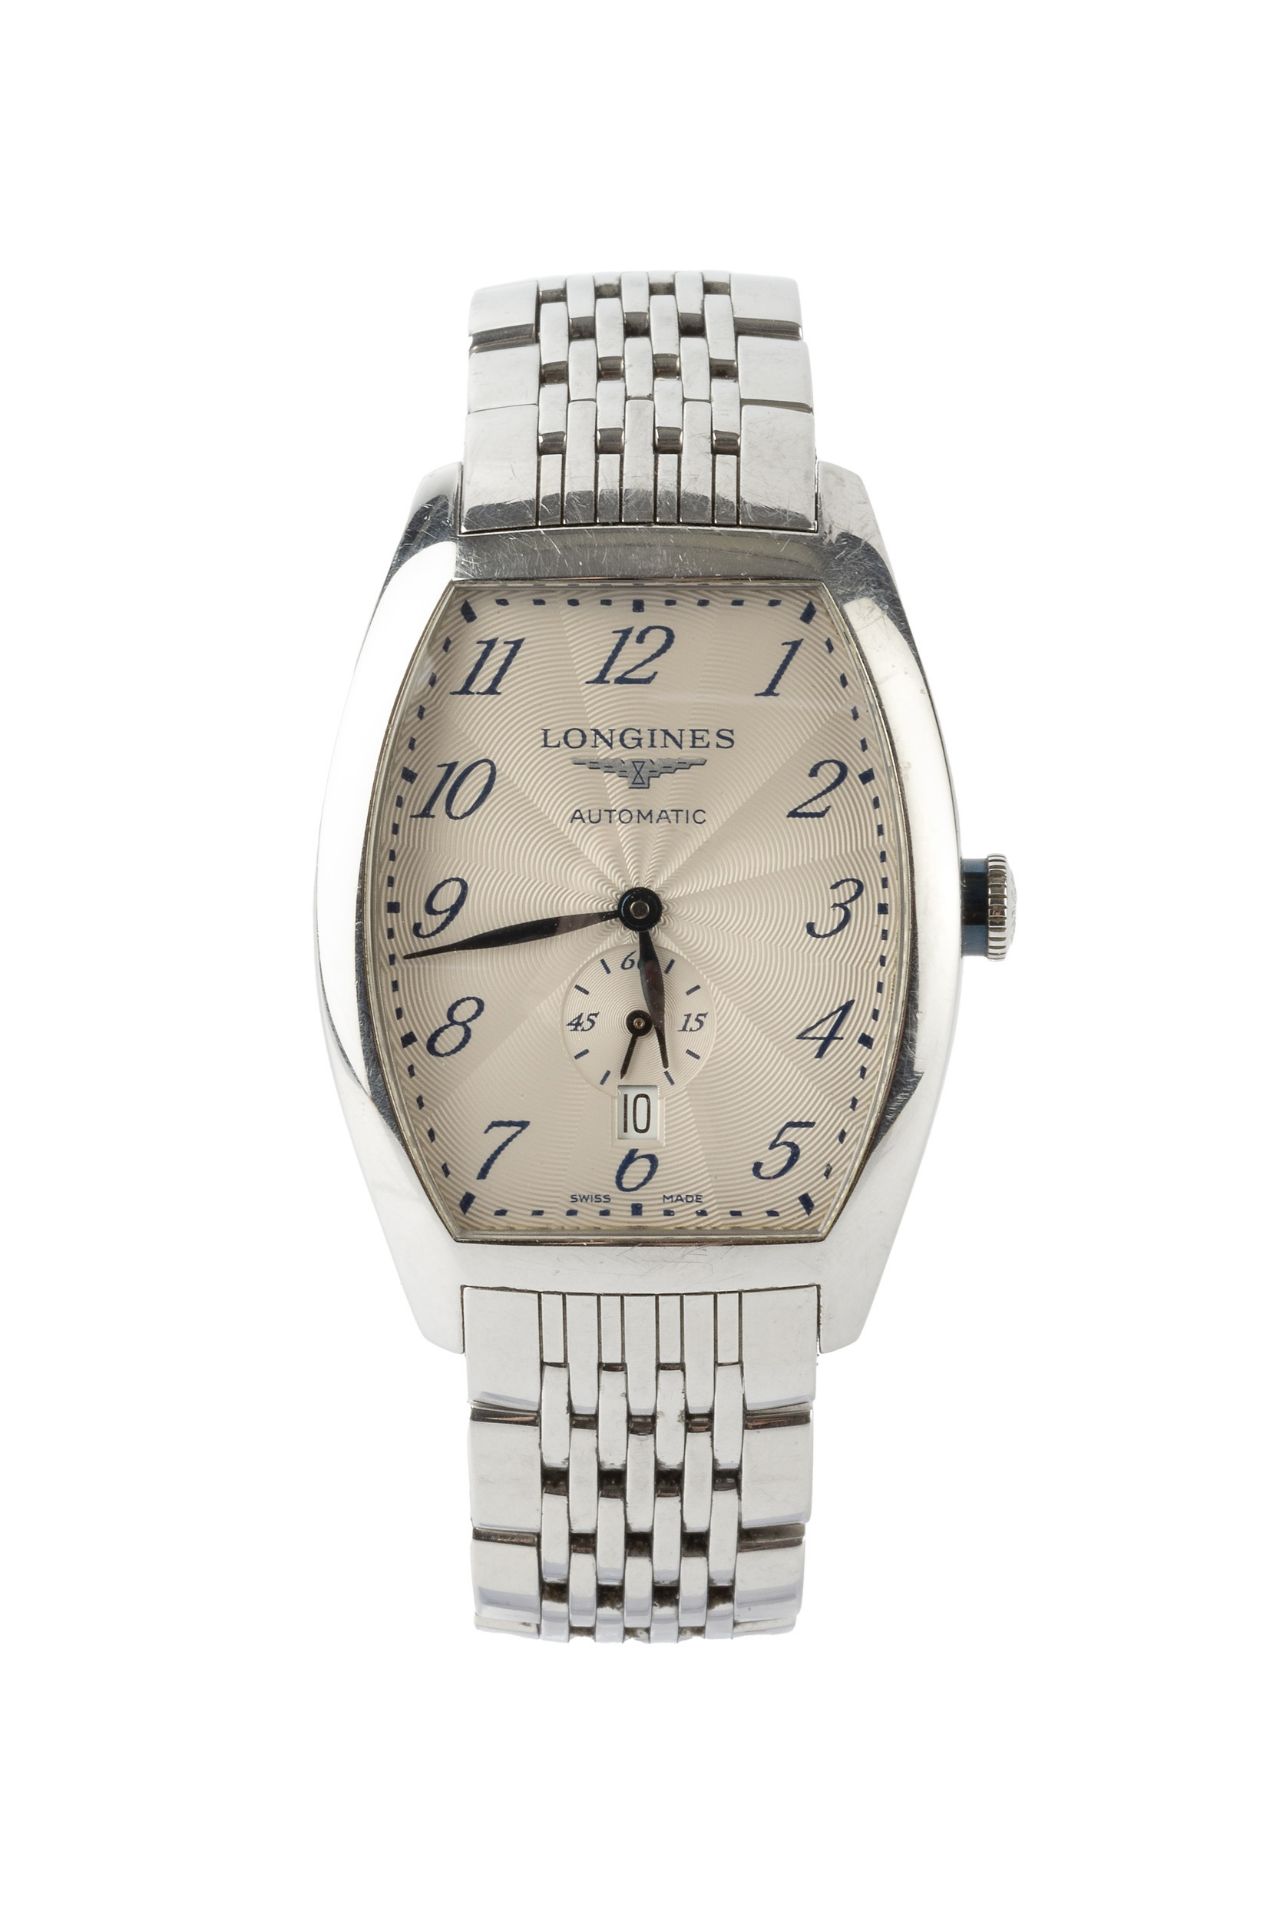 A stainless steel Evidenza automatic wristwatch by Longines, the tonneau case with silvered sunburst